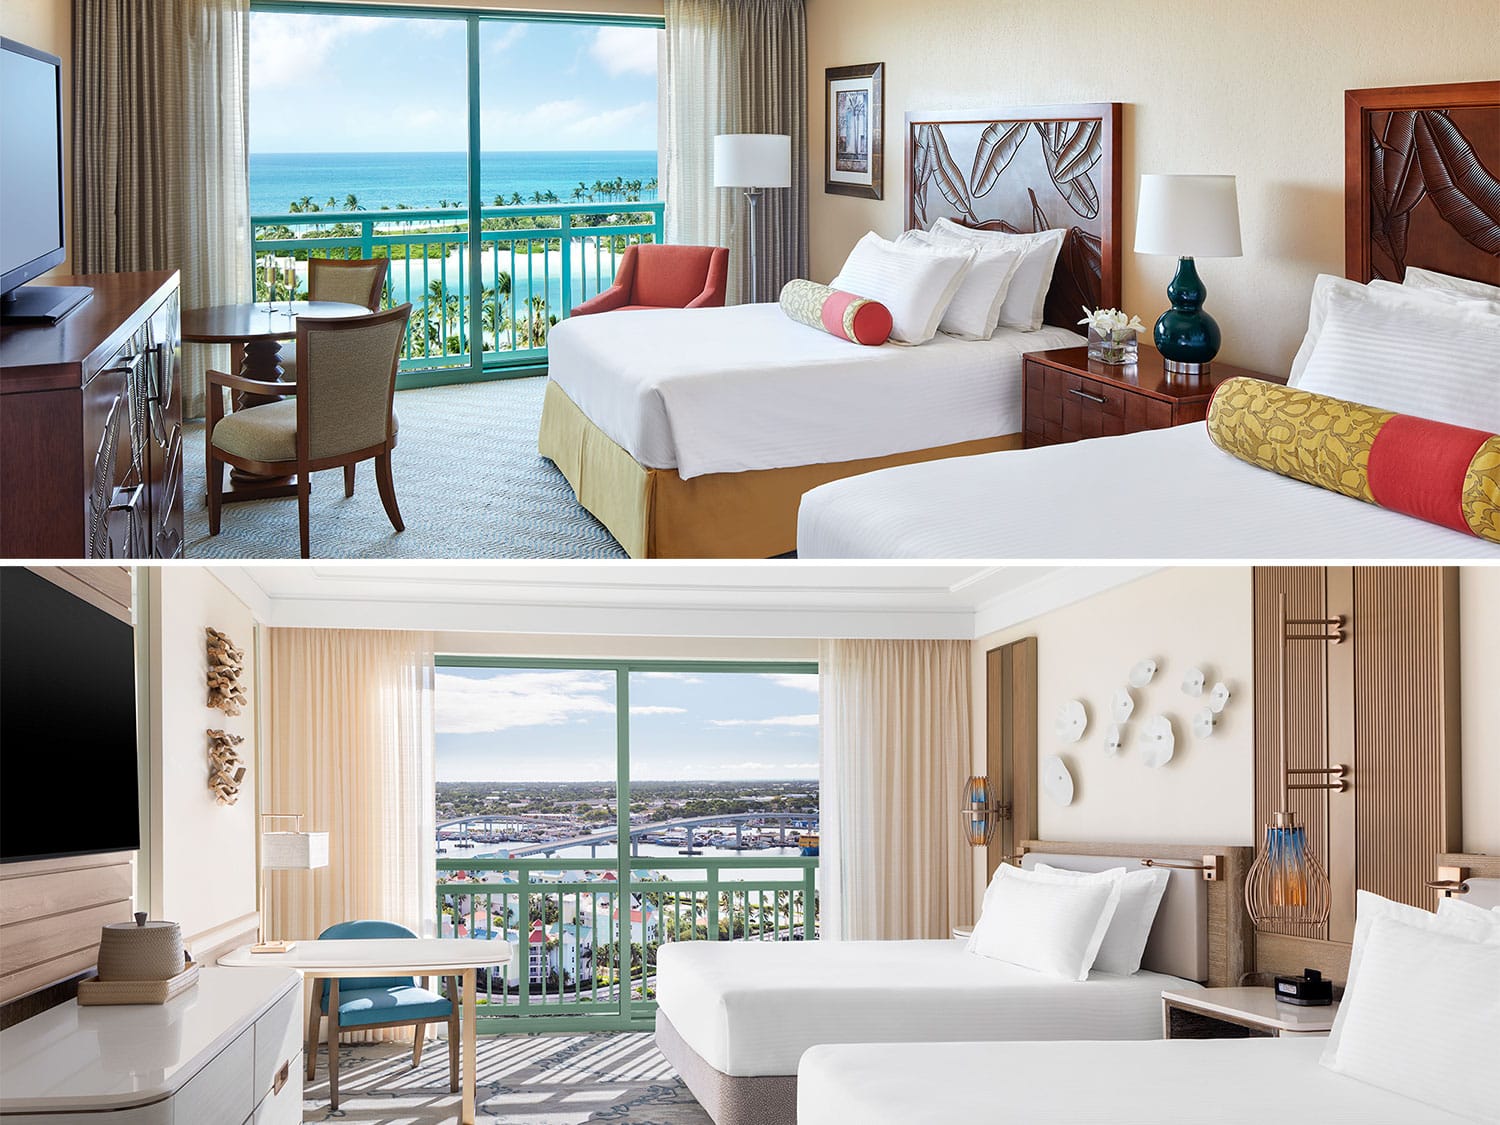 An image collage of two Island resort bedrooms.